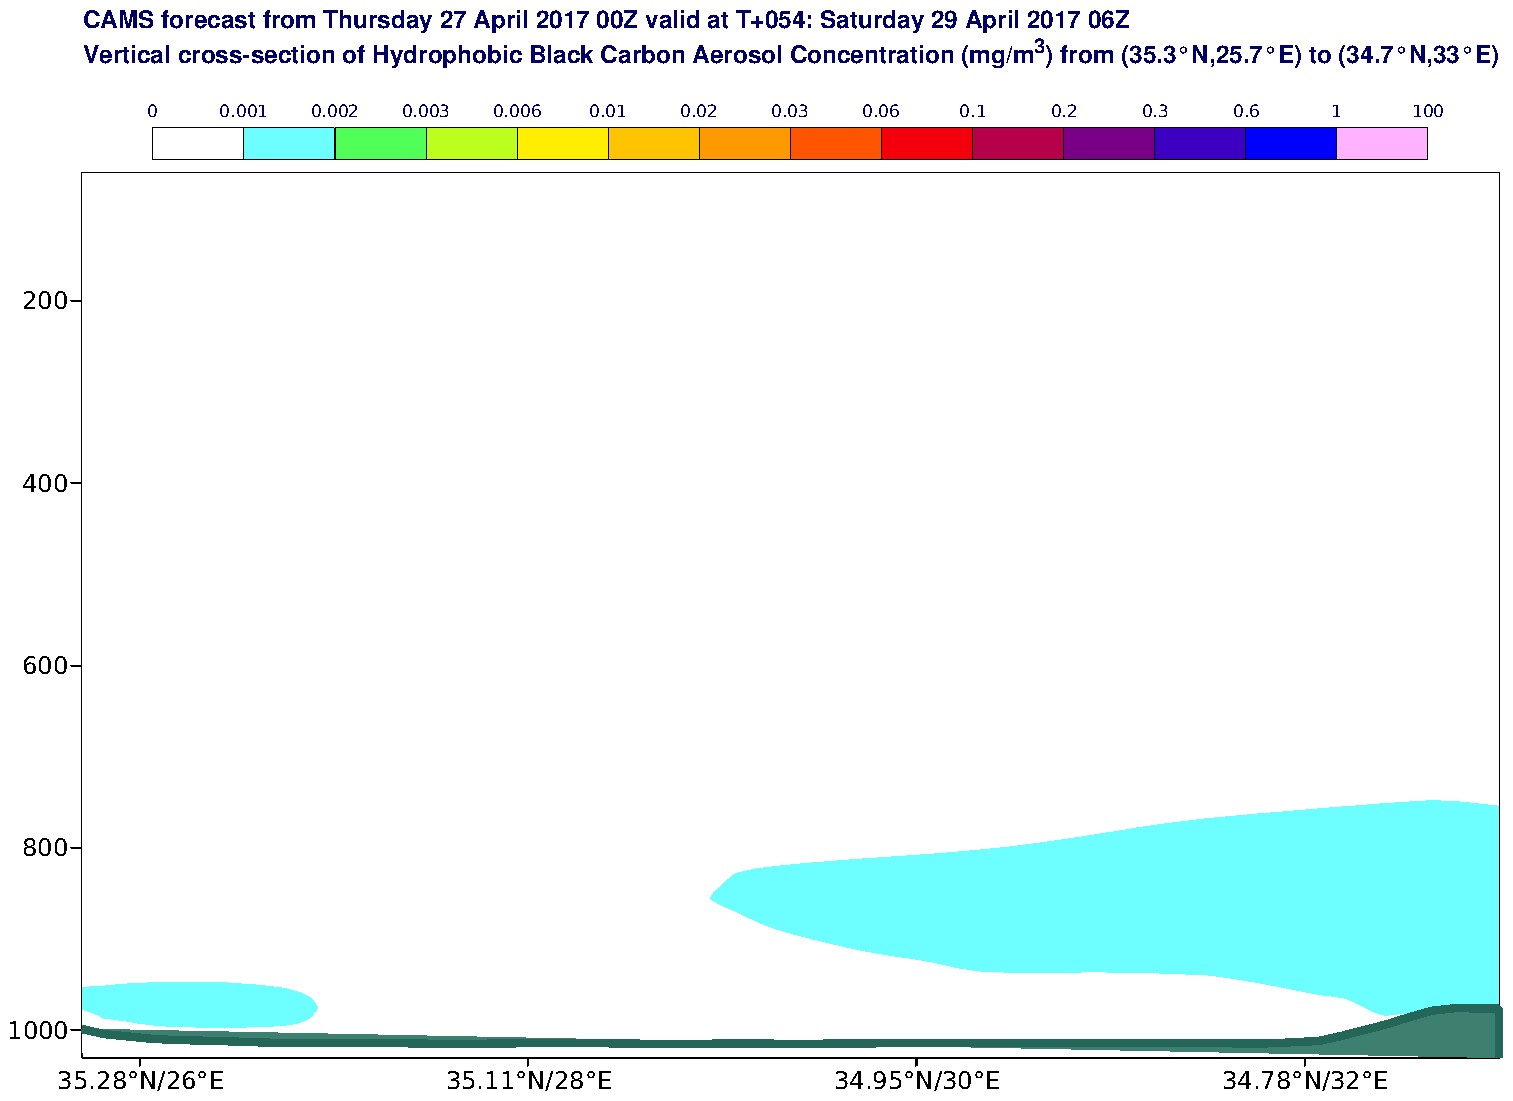 Vertical cross-section of Hydrophobic Black Carbon Aerosol Concentration (mg/m3) valid at T54 - 2017-04-29 06:00